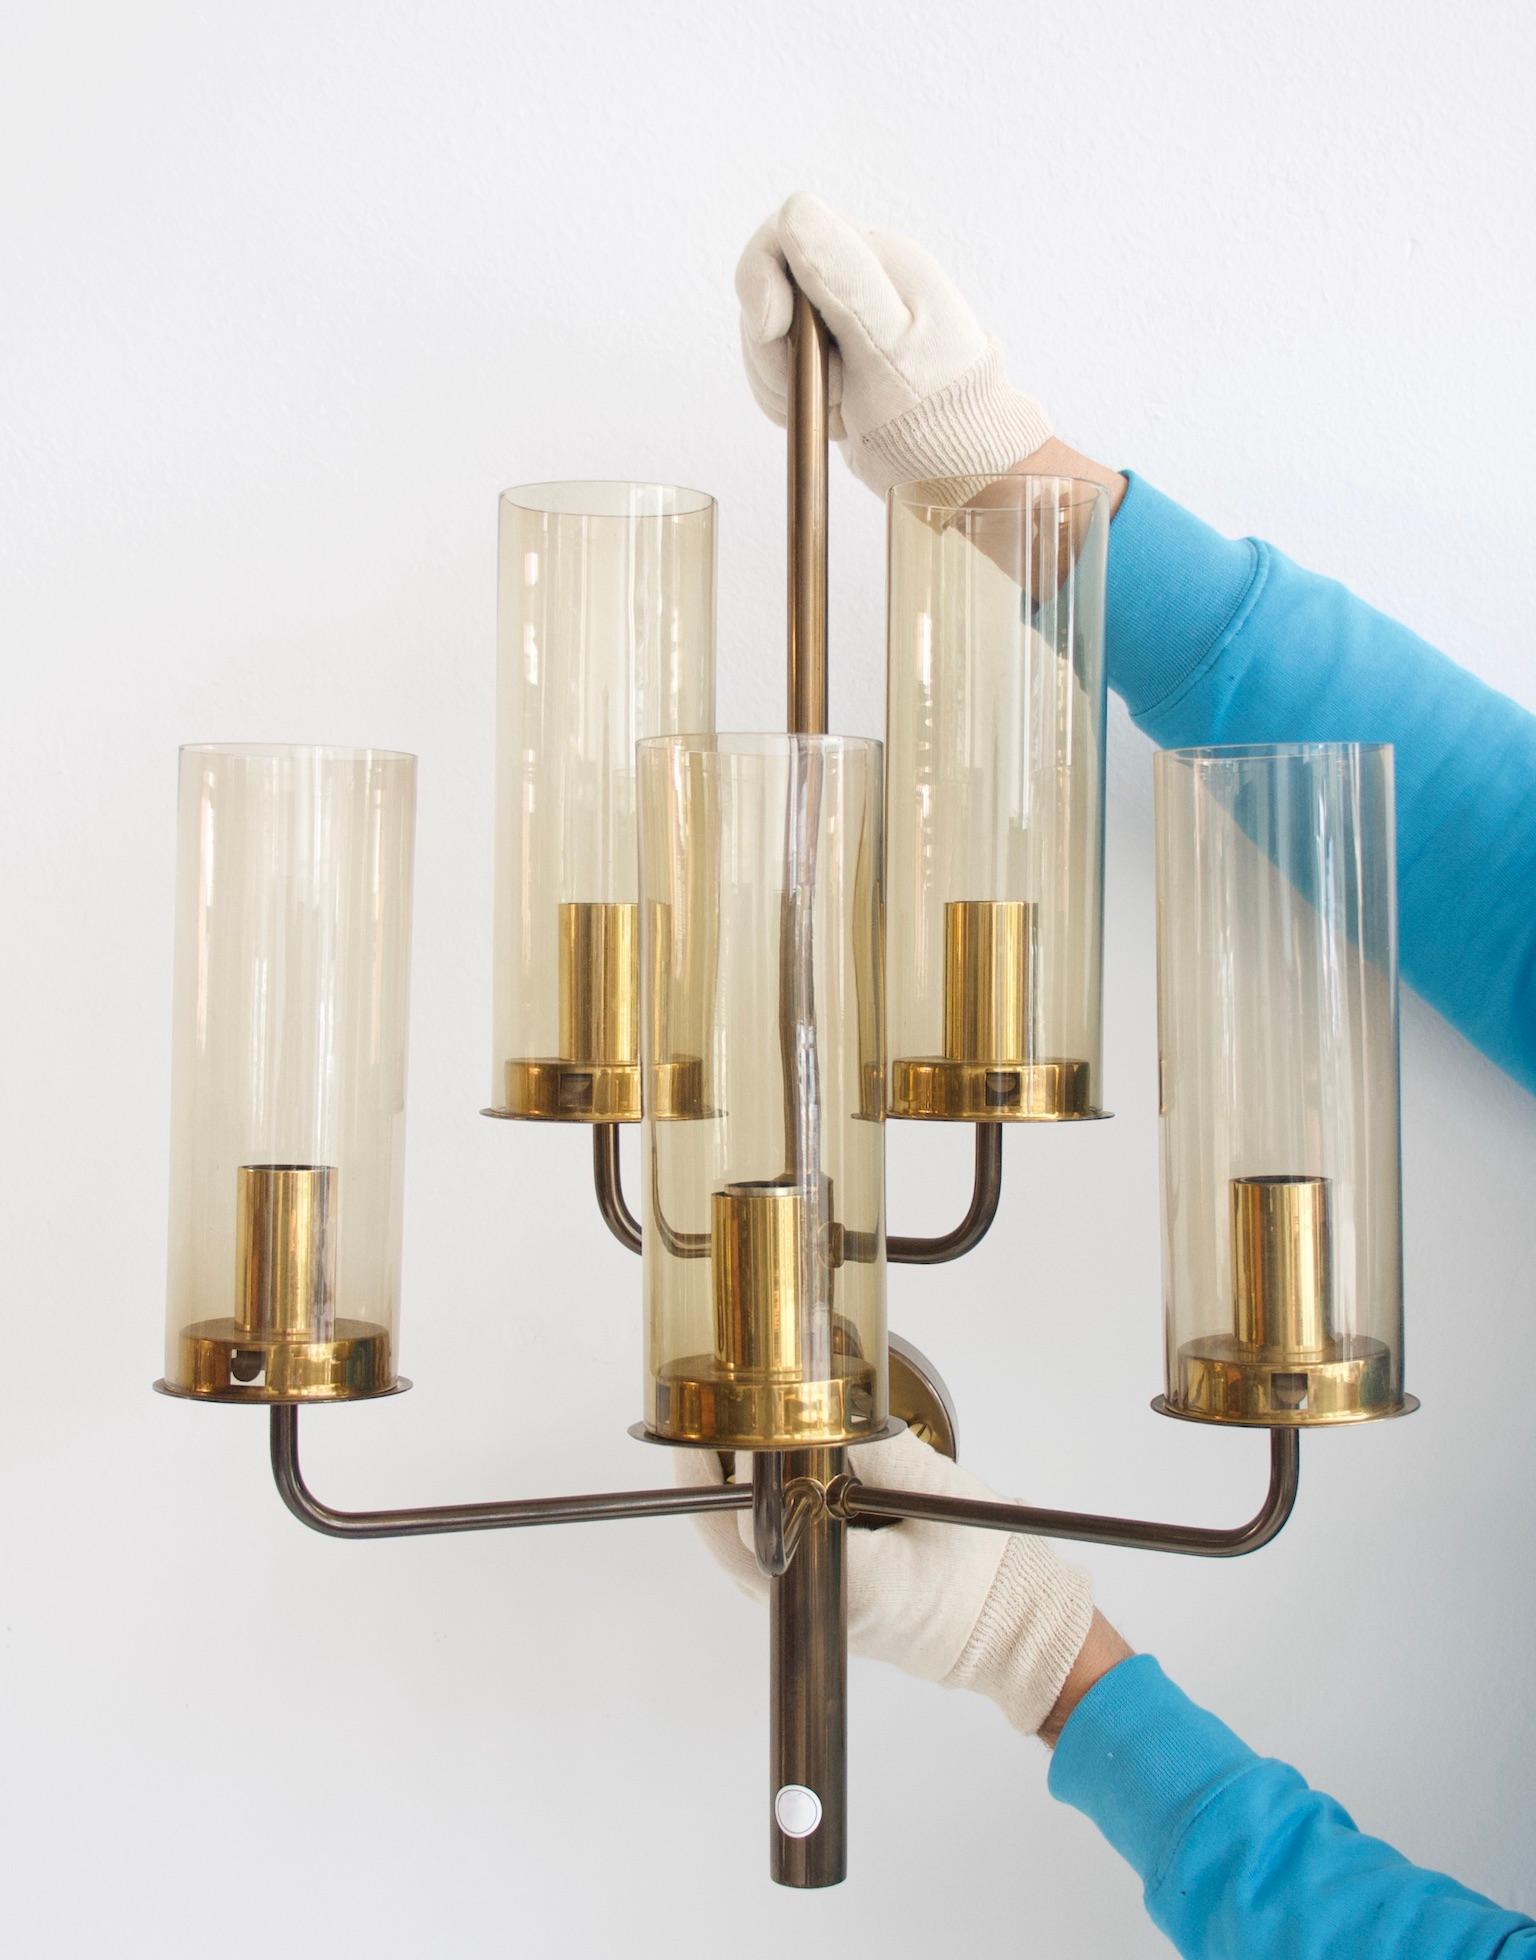 Elegant brass wall lamp with five arms and lights, amber glass shades, designed by Hans-Agne Jakobsson. Made in Sweden by AB Markaryd.